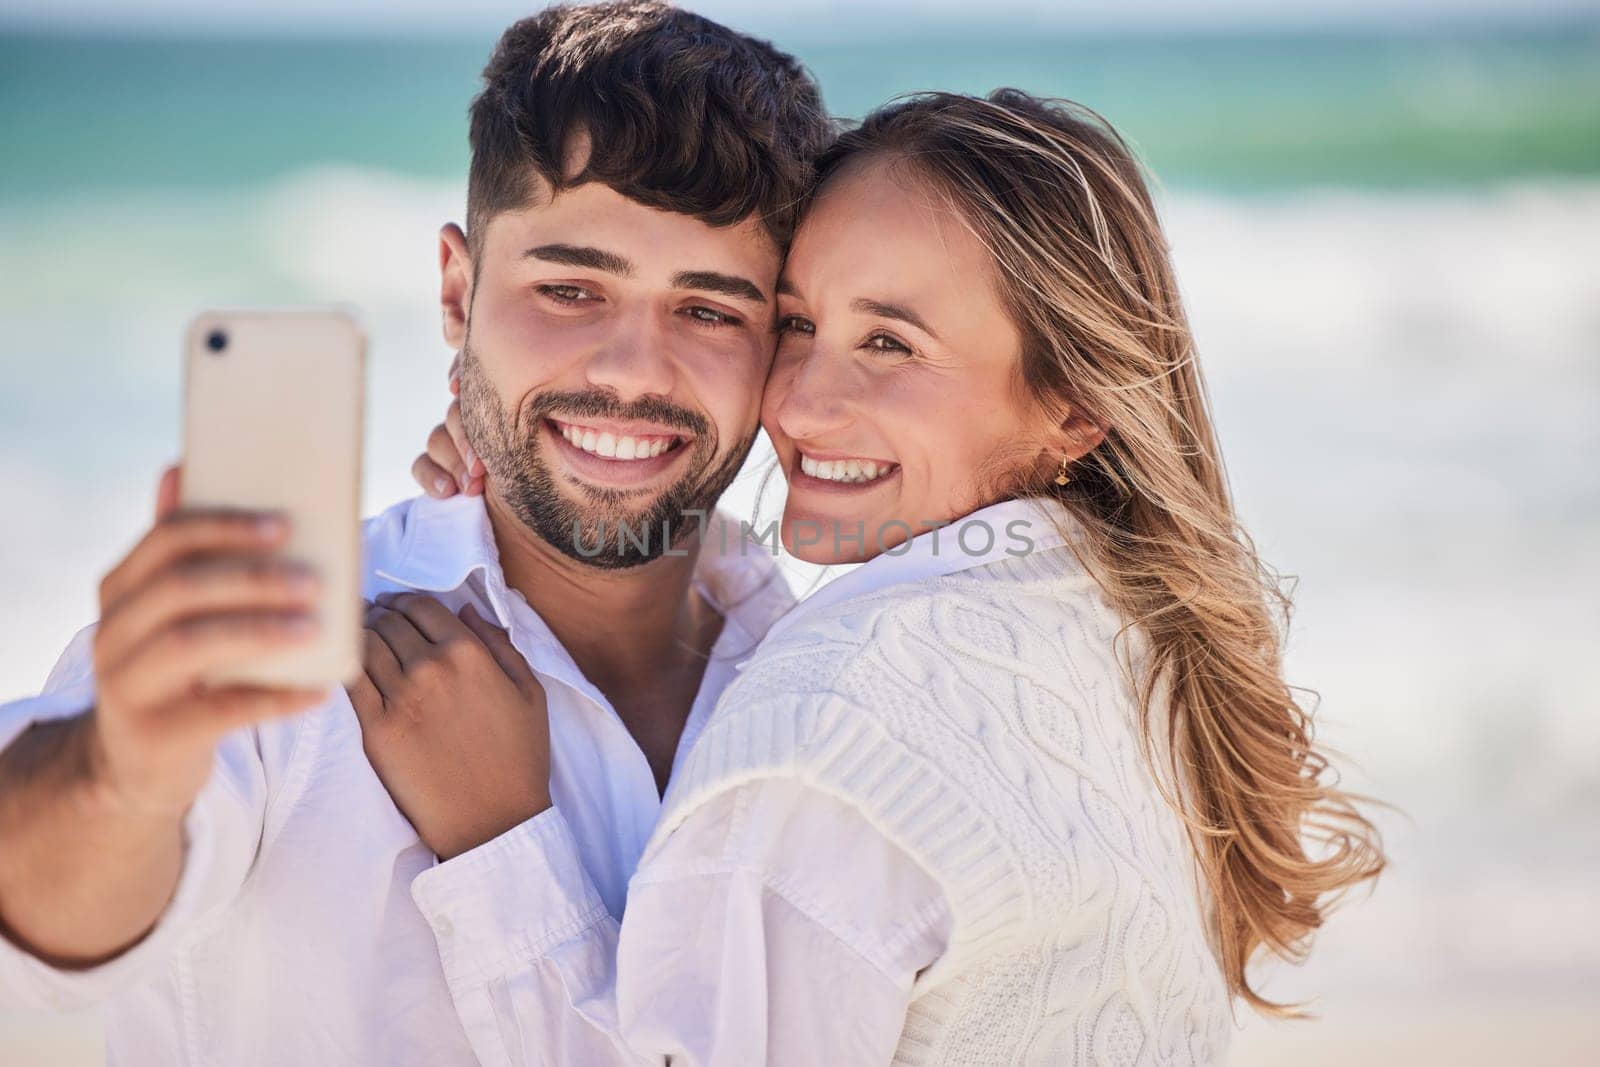 Beach, love and happy couple taking a selfie while on a date for valentines day, romance or anniversary. Happiness, smile and young man and woman hugging while taking picture by the ocean on vacation.